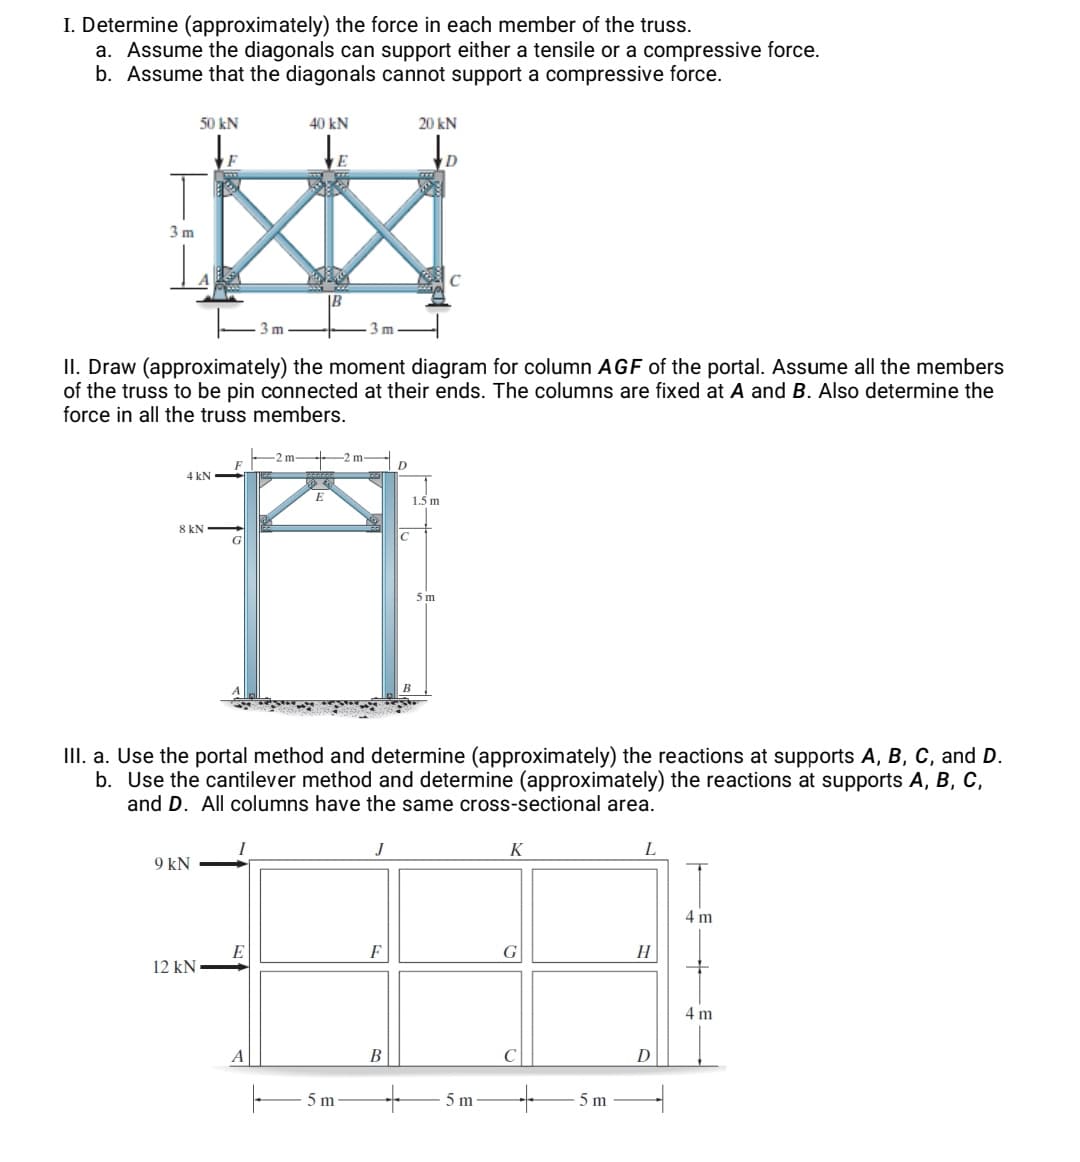 I. Determine (approximately) the force in each member of the truss.
a. Assume the diagonals can support either a tensile or a compressive force.
b. Assume that the diagonals cannot support a compressive force.
50 kN
40 kN
20 kN
3 m
m
3 m
II. Draw (approximately) the moment diagram for column AGF of the portal. Assume all the members
of the truss to be pin connected at their ends. The columns are fixed at A and B. Also determine the
force in all the truss members.
2m -2 m
D.
4 kN
1.5 m
8 kN
G
5m
II. a. Use the portal method and determine (approximately) the reactions at supports A, B, C, and D.
b. Use the cantilever method and determine (approximately) the reactions at supports A, B, C,
and D. All columns have the same cross-sectional area.
J
K
9 kN
4 m
F
12 kN
4 m
В
5 m
5 m
5 m
